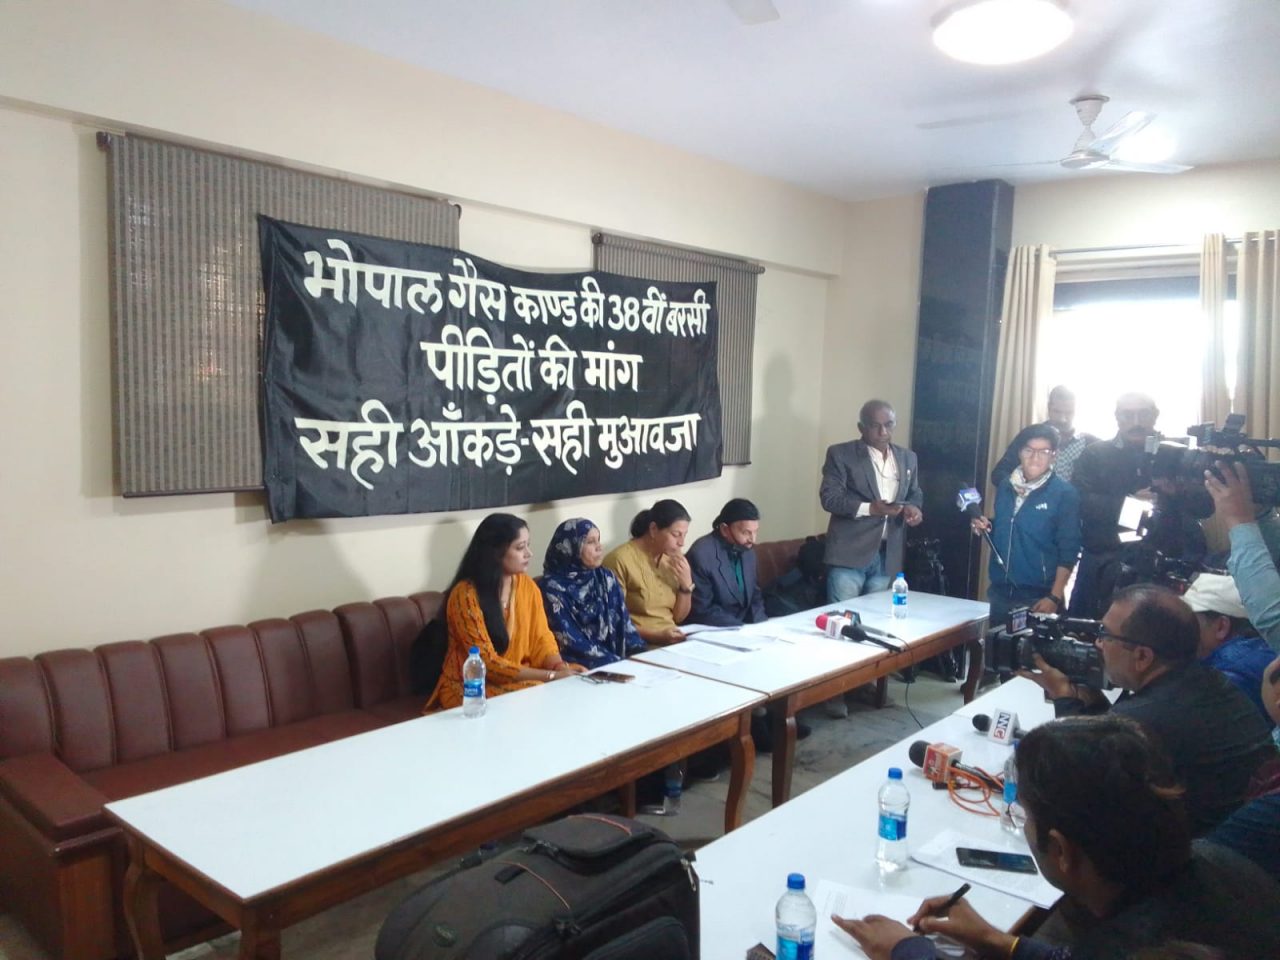 Leaders-of-five-survivors-Bhopal-Gas-Tragedy-organizations-addressing-Press-Conference-in-Bhopal.-1280x960.jpeg